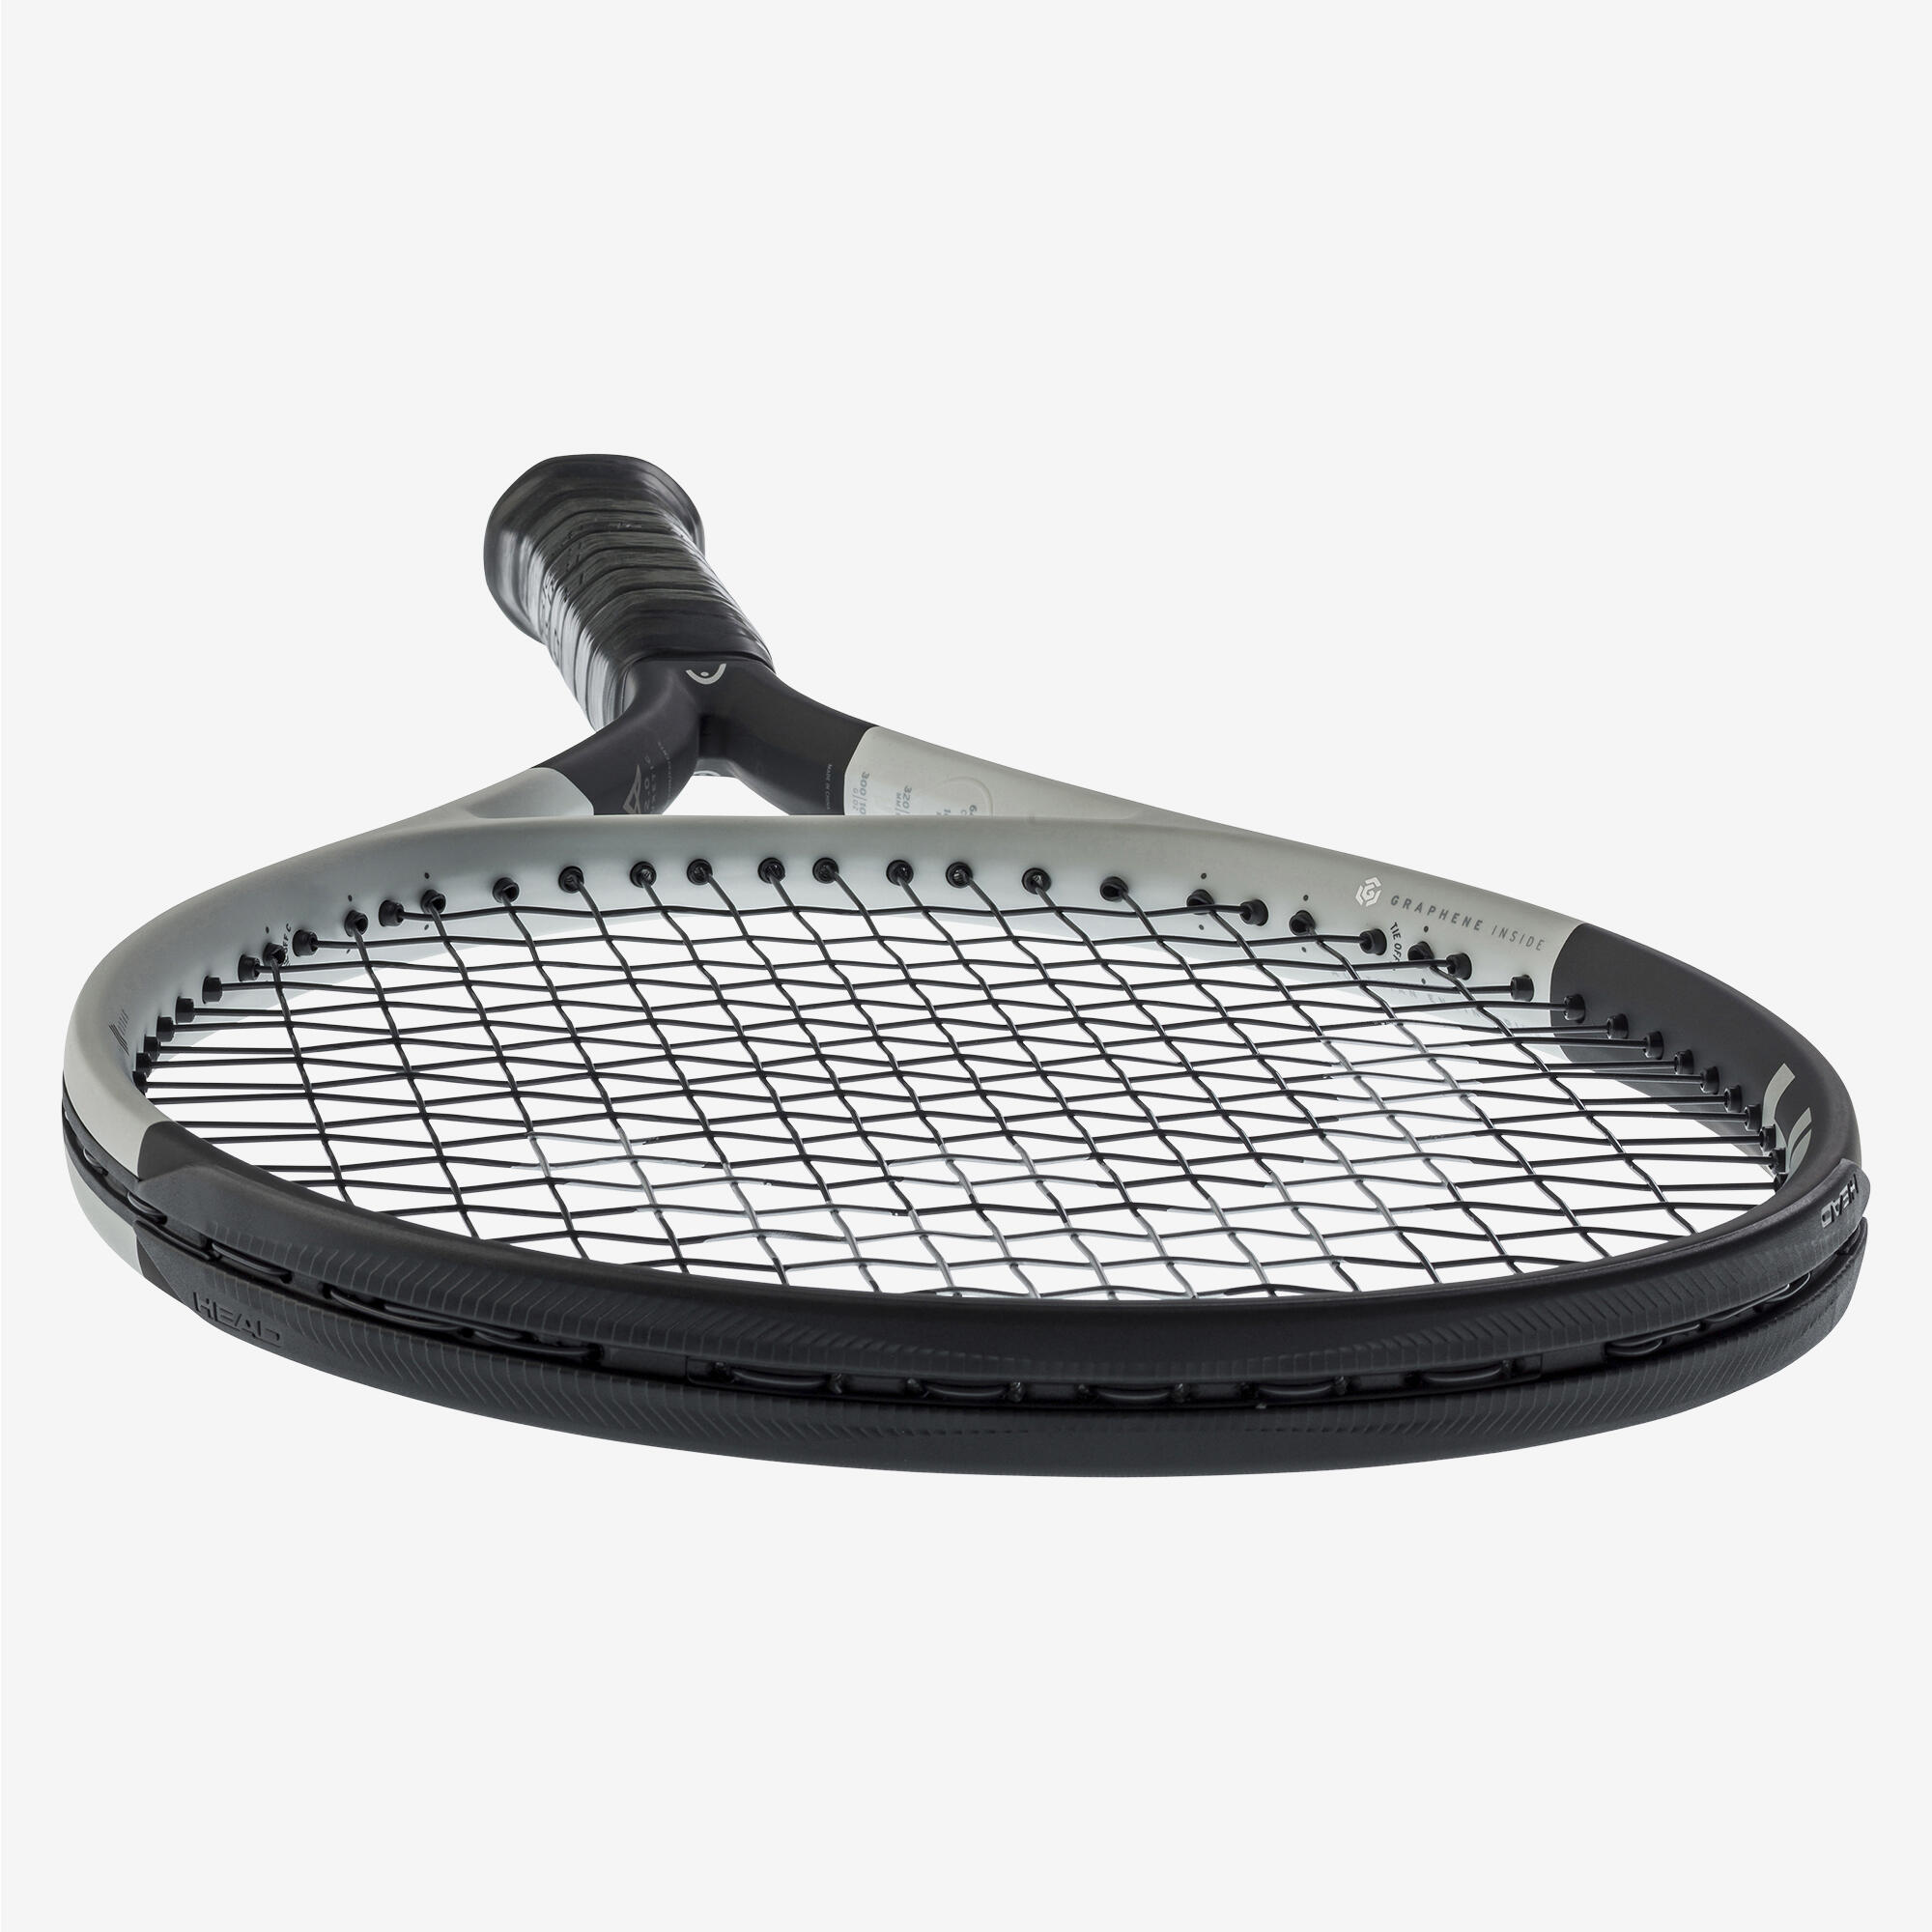 Adult Tennis Racket Auxetic Speed MP 2024 300g - Black/White HEAD 